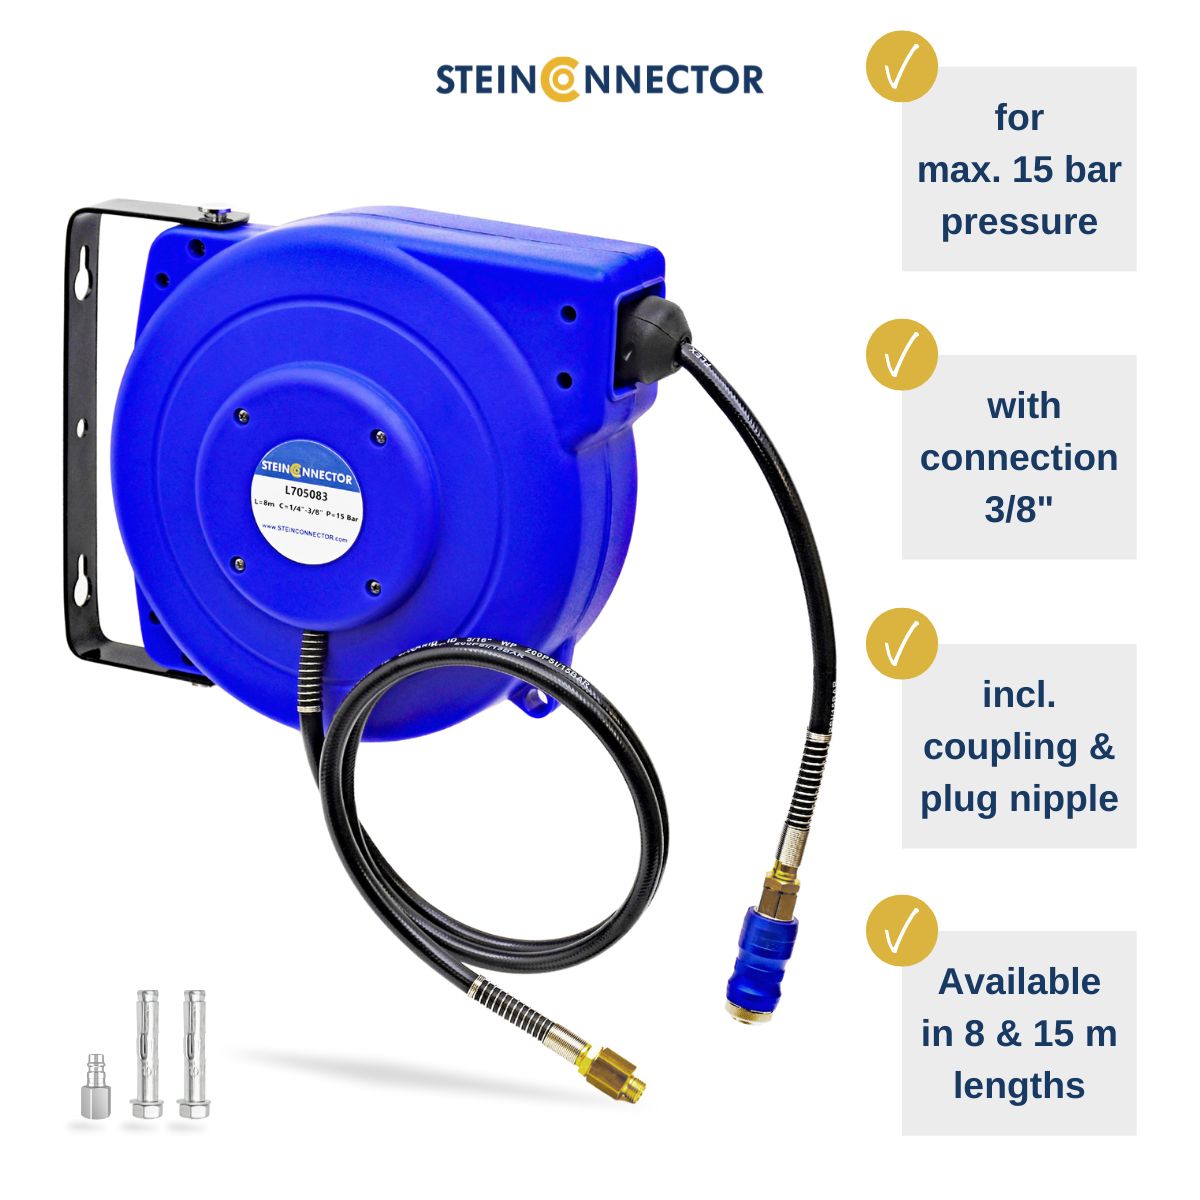 https://www.steinconnector.com/fileadmin//images/Landingpages/Zubeh%C3%B6r/EN/02_Steinconnector_automatic_hose_reel_8_and_15_m_hose_uncoiler_professional_hose_box_with_wall_mounting_with_compressed_air_coupling_blue.jpg